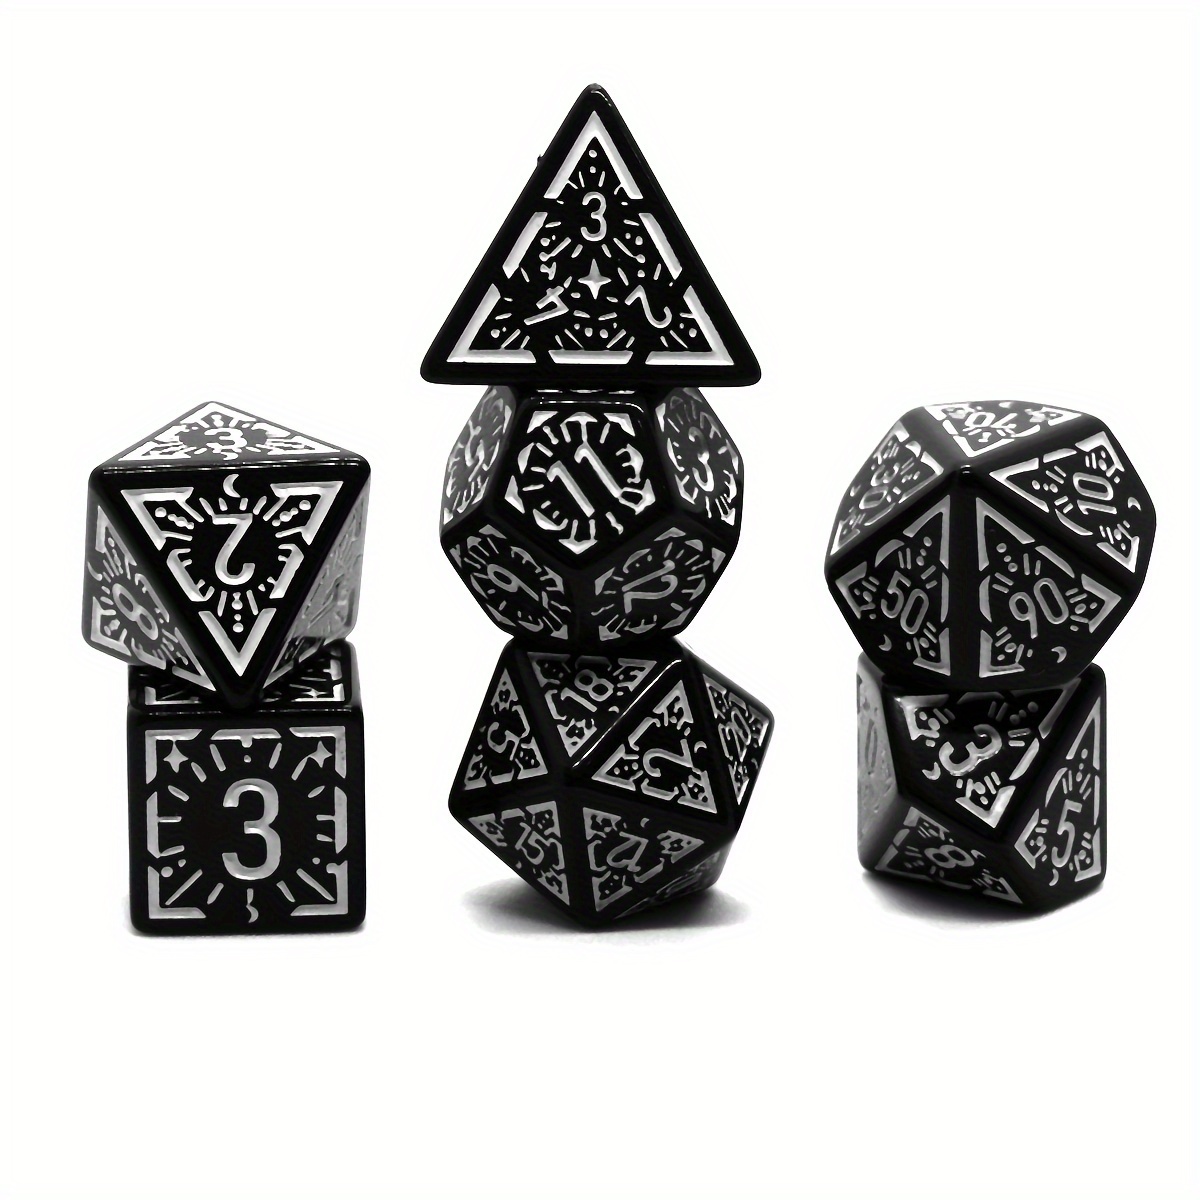 

7pcs Classical Rune Black And White Character Board Game Dice Set, Party Entertainment Game Dices